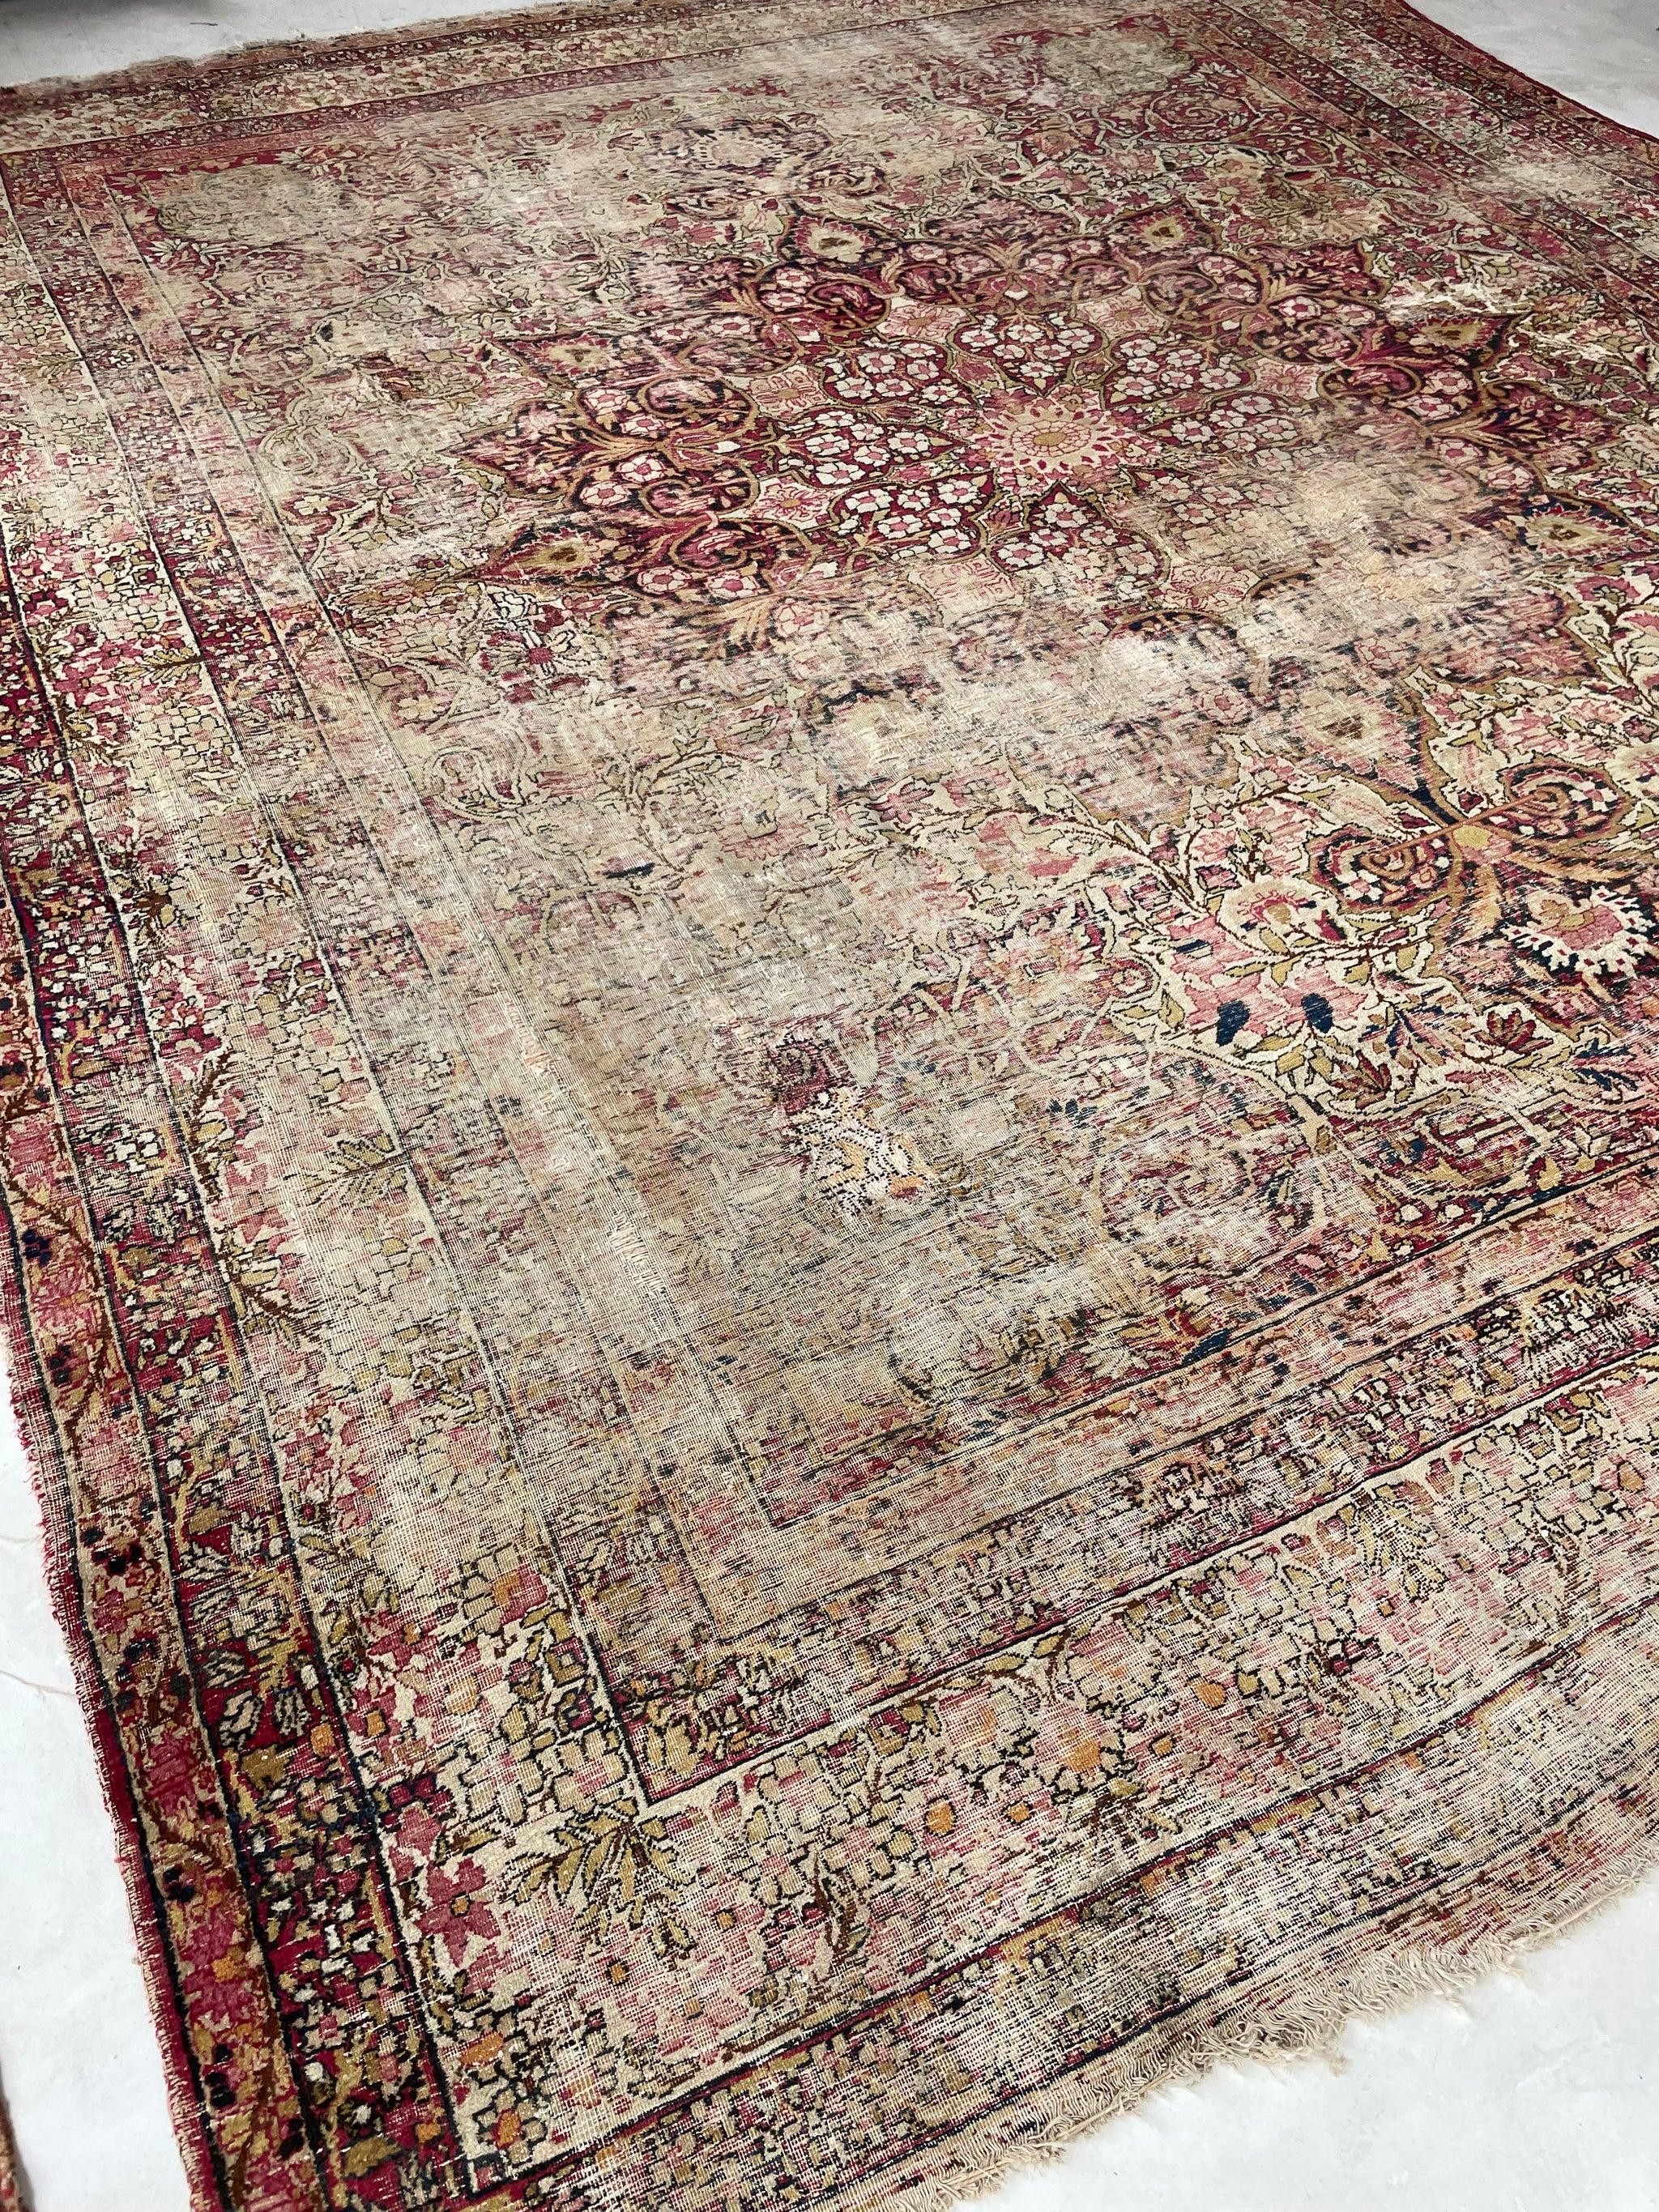 Gorgeous Muted Character-Rich Antique Kermanshah rug Oversized Moss, Sage, Olive & Earthy Greens 

Size: 11 x 13
Age: Antique C. 1900's
Pile: Low with Antique Patina; this piece has been re-woven in some areas that needed it - it was super